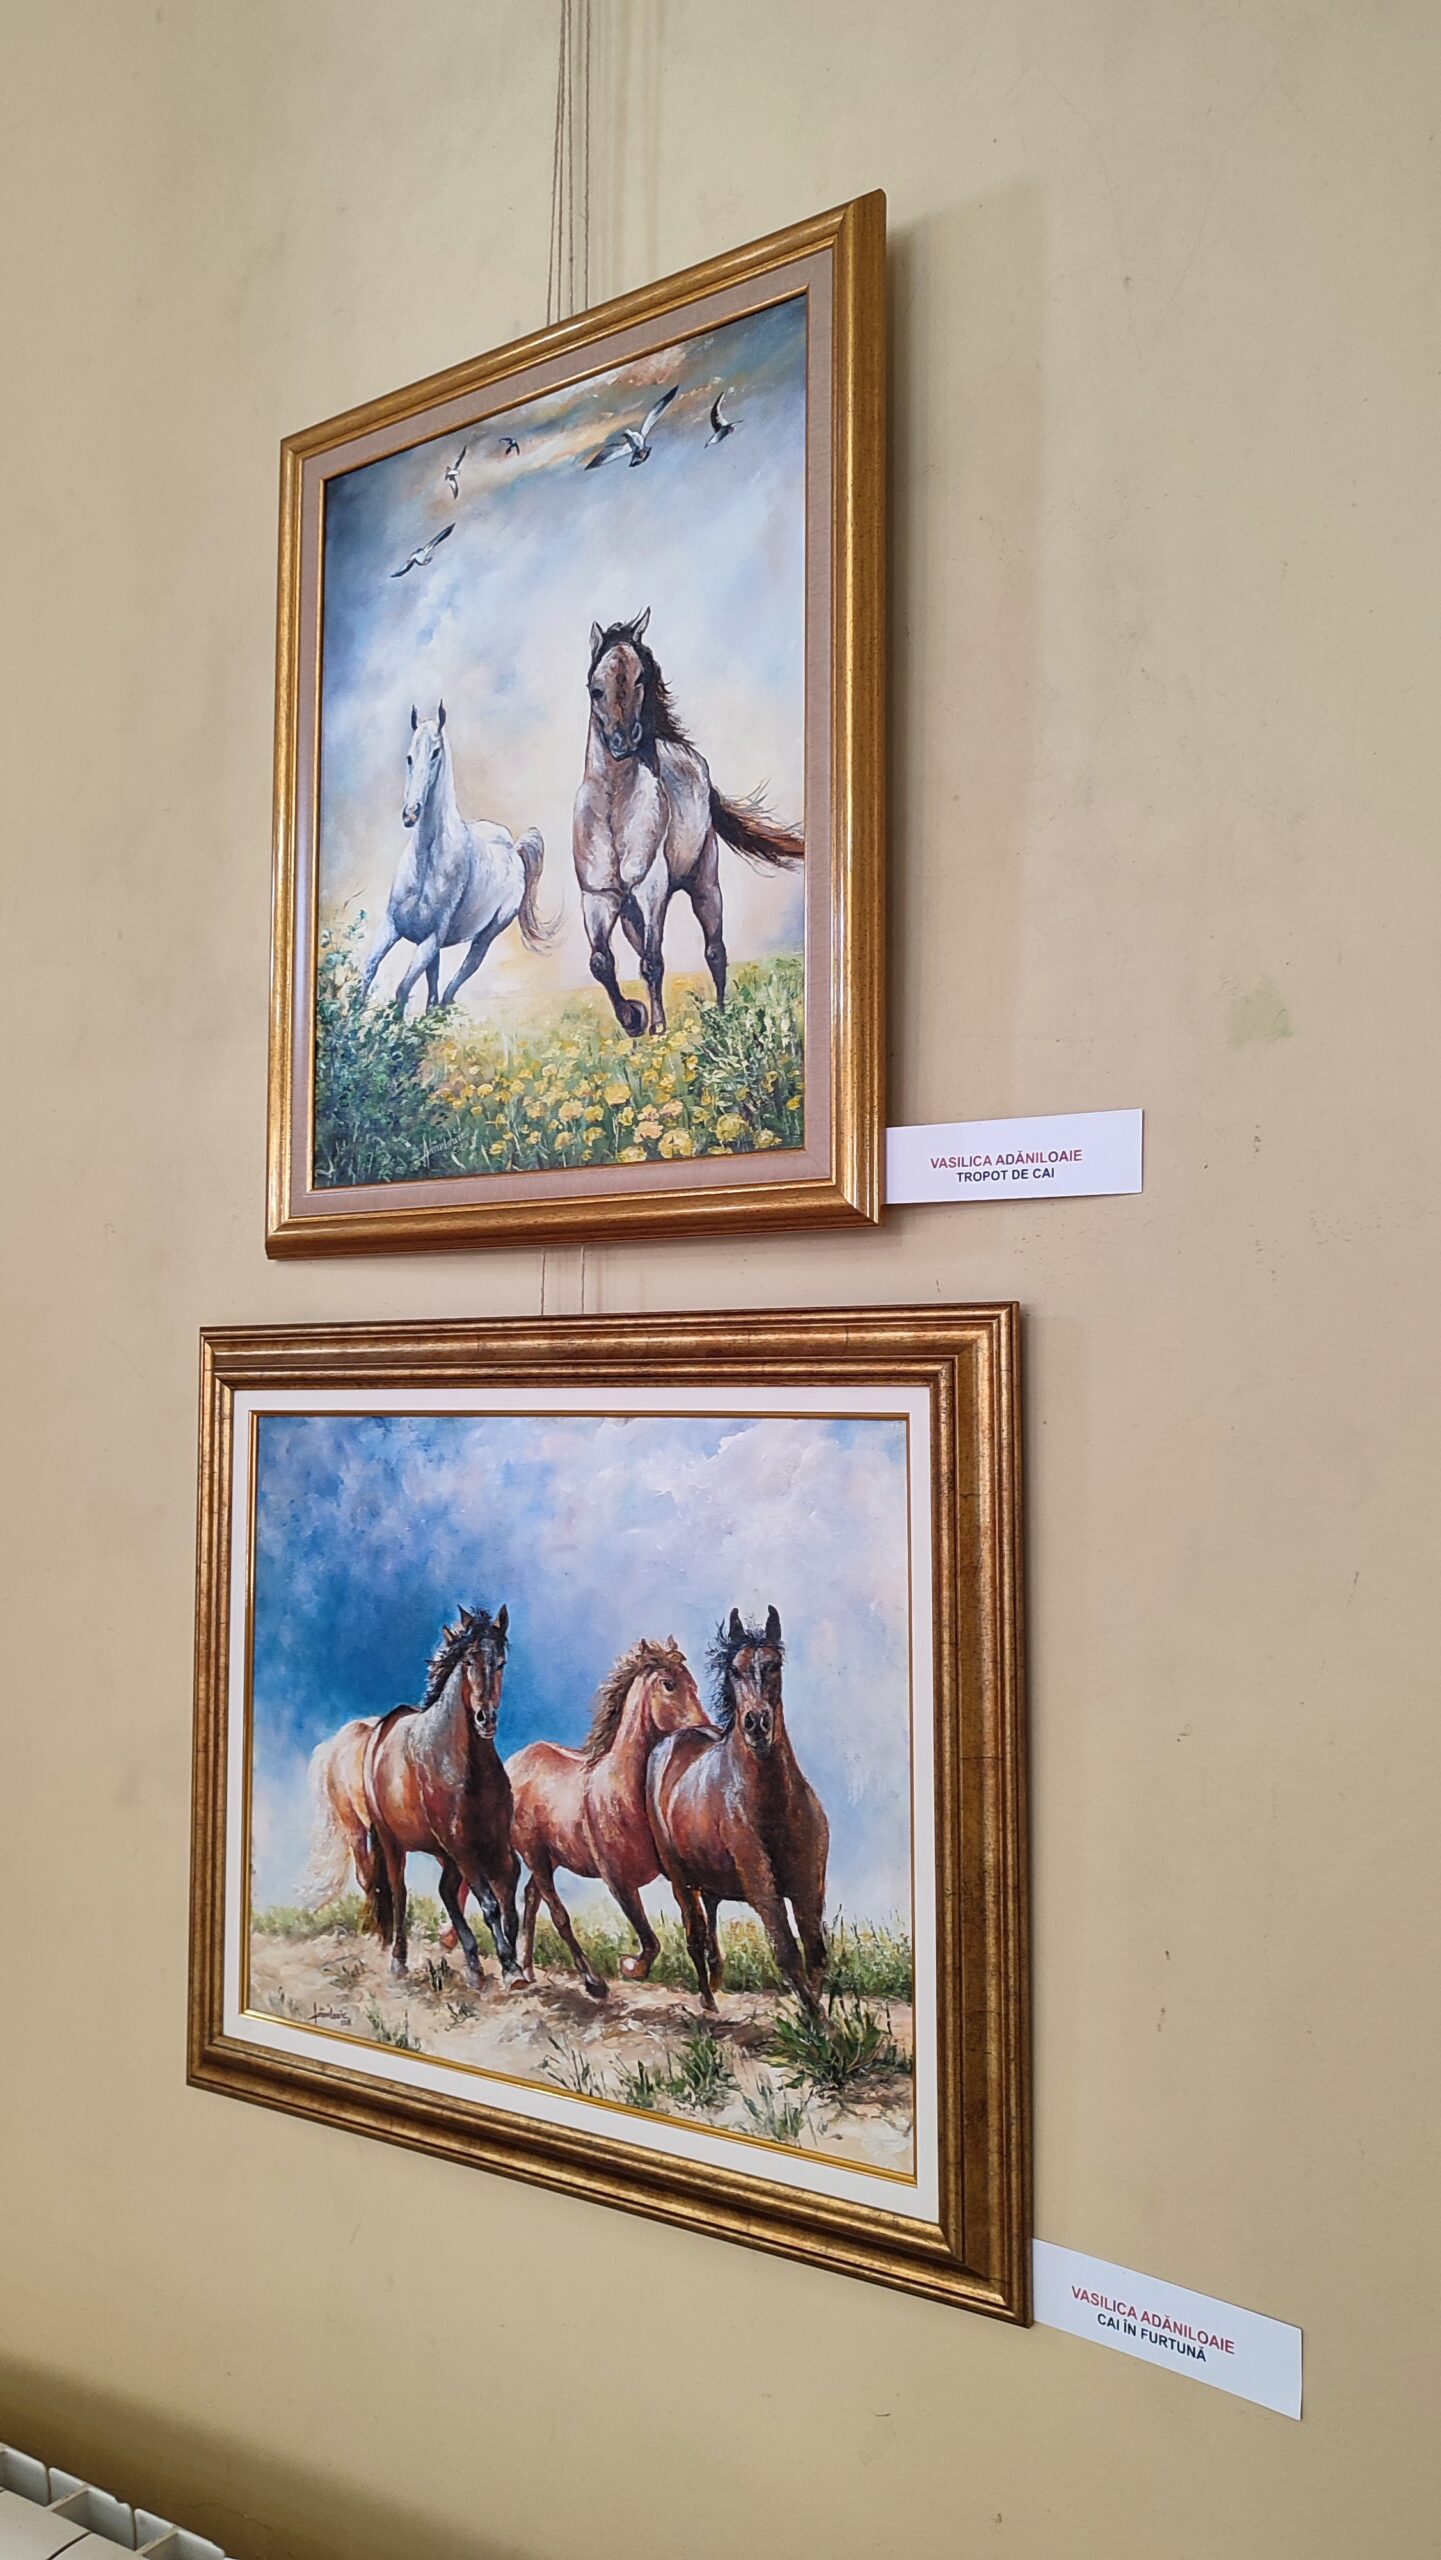 Round Room art gallery horse paintings at the Military Circle